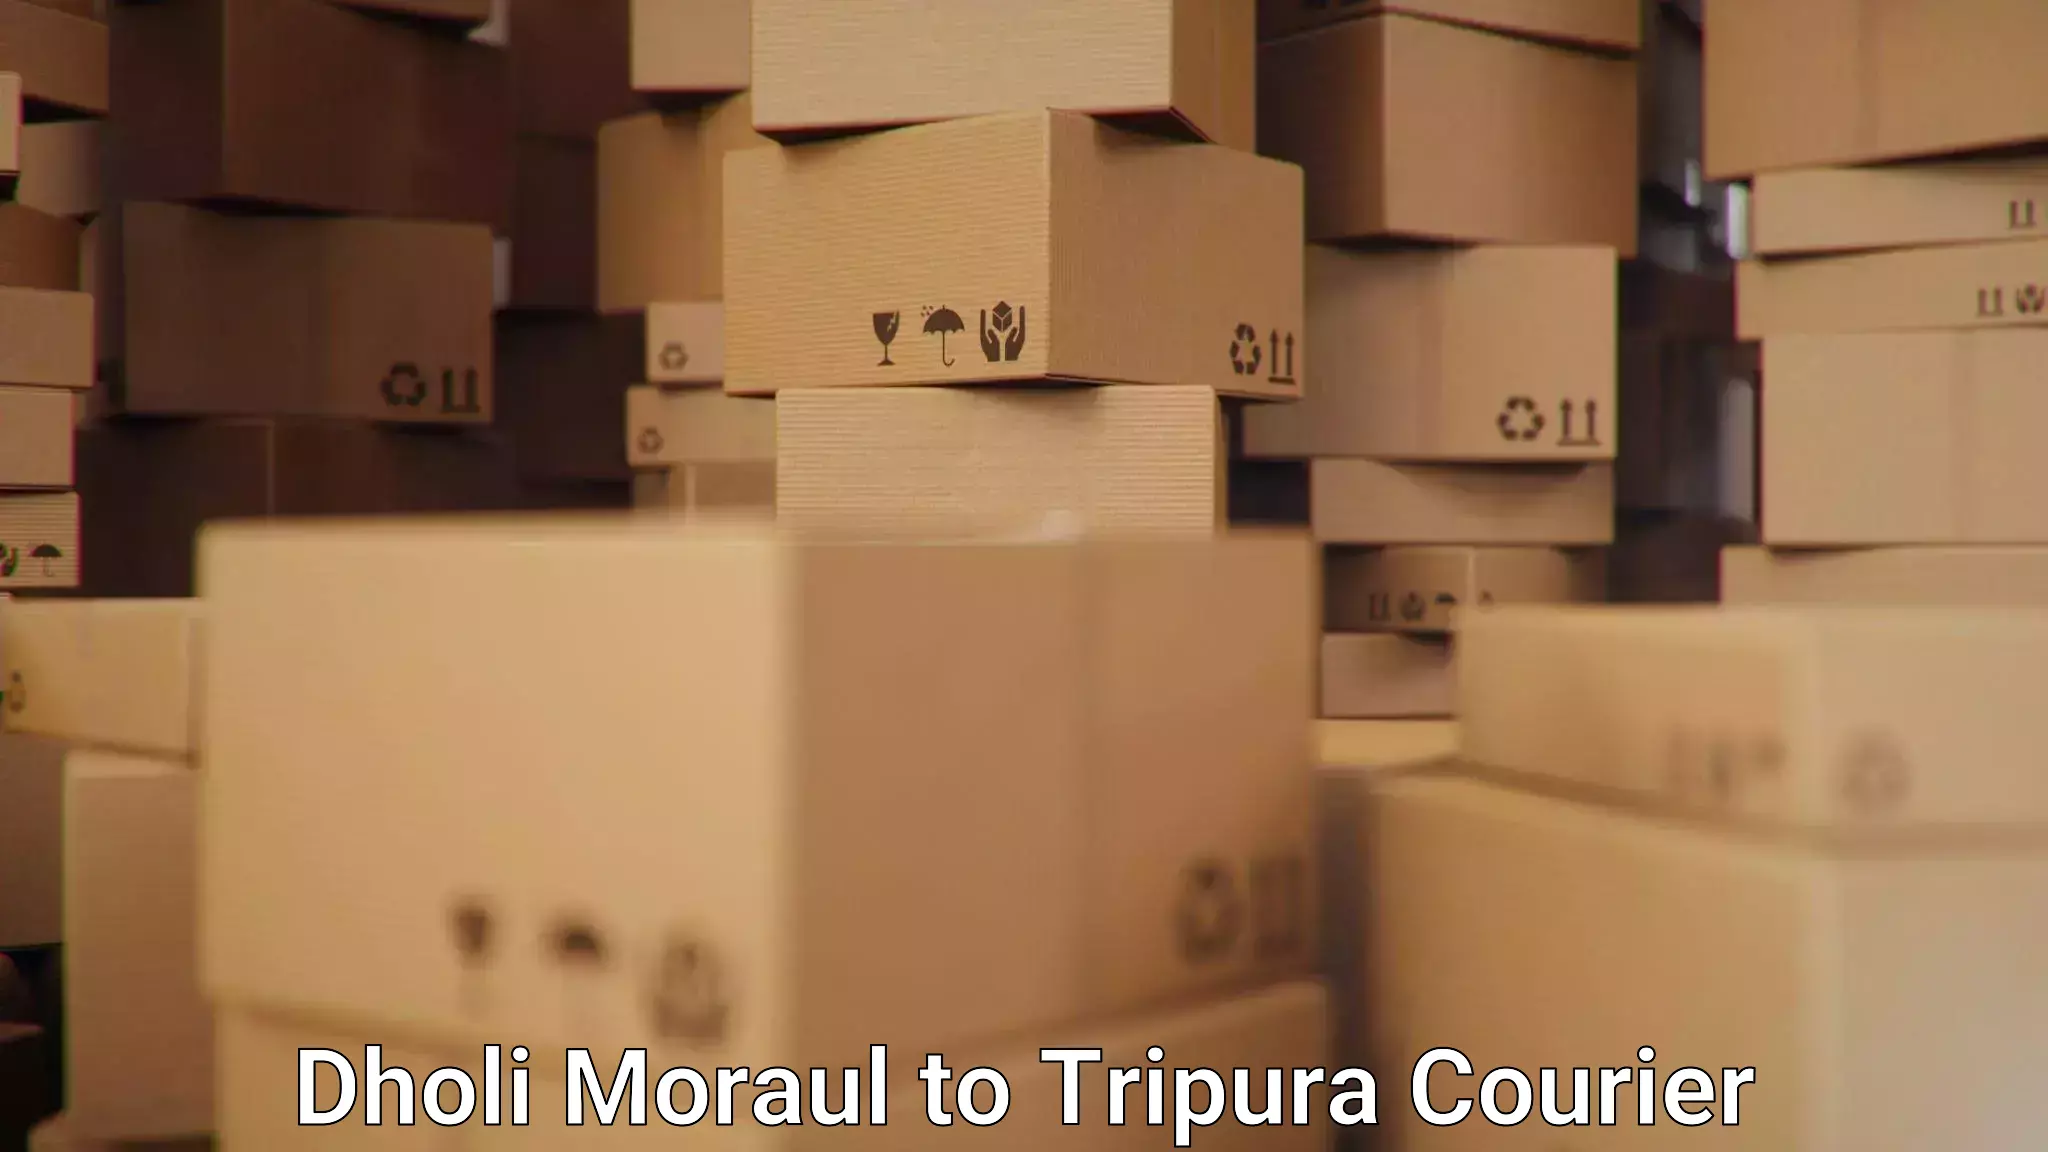 Express delivery capabilities Dholi Moraul to South Tripura